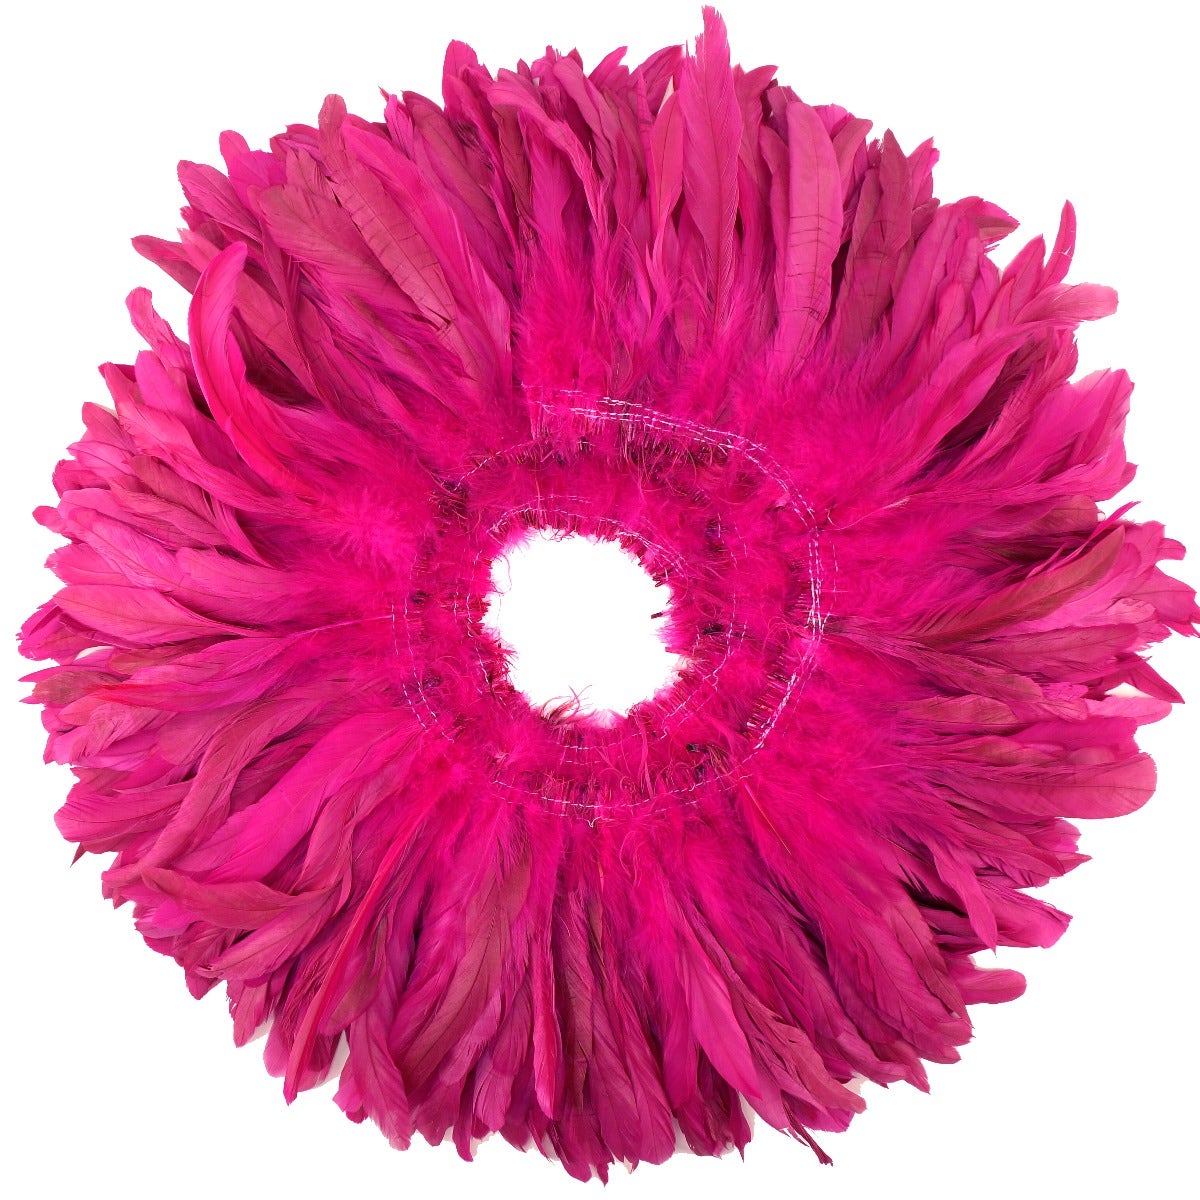 ROOSTER COQUE TAILS FEATHERS BLEACH DYED 7-10” - 1/2 Yard ( 18" ) - Shocking Pink